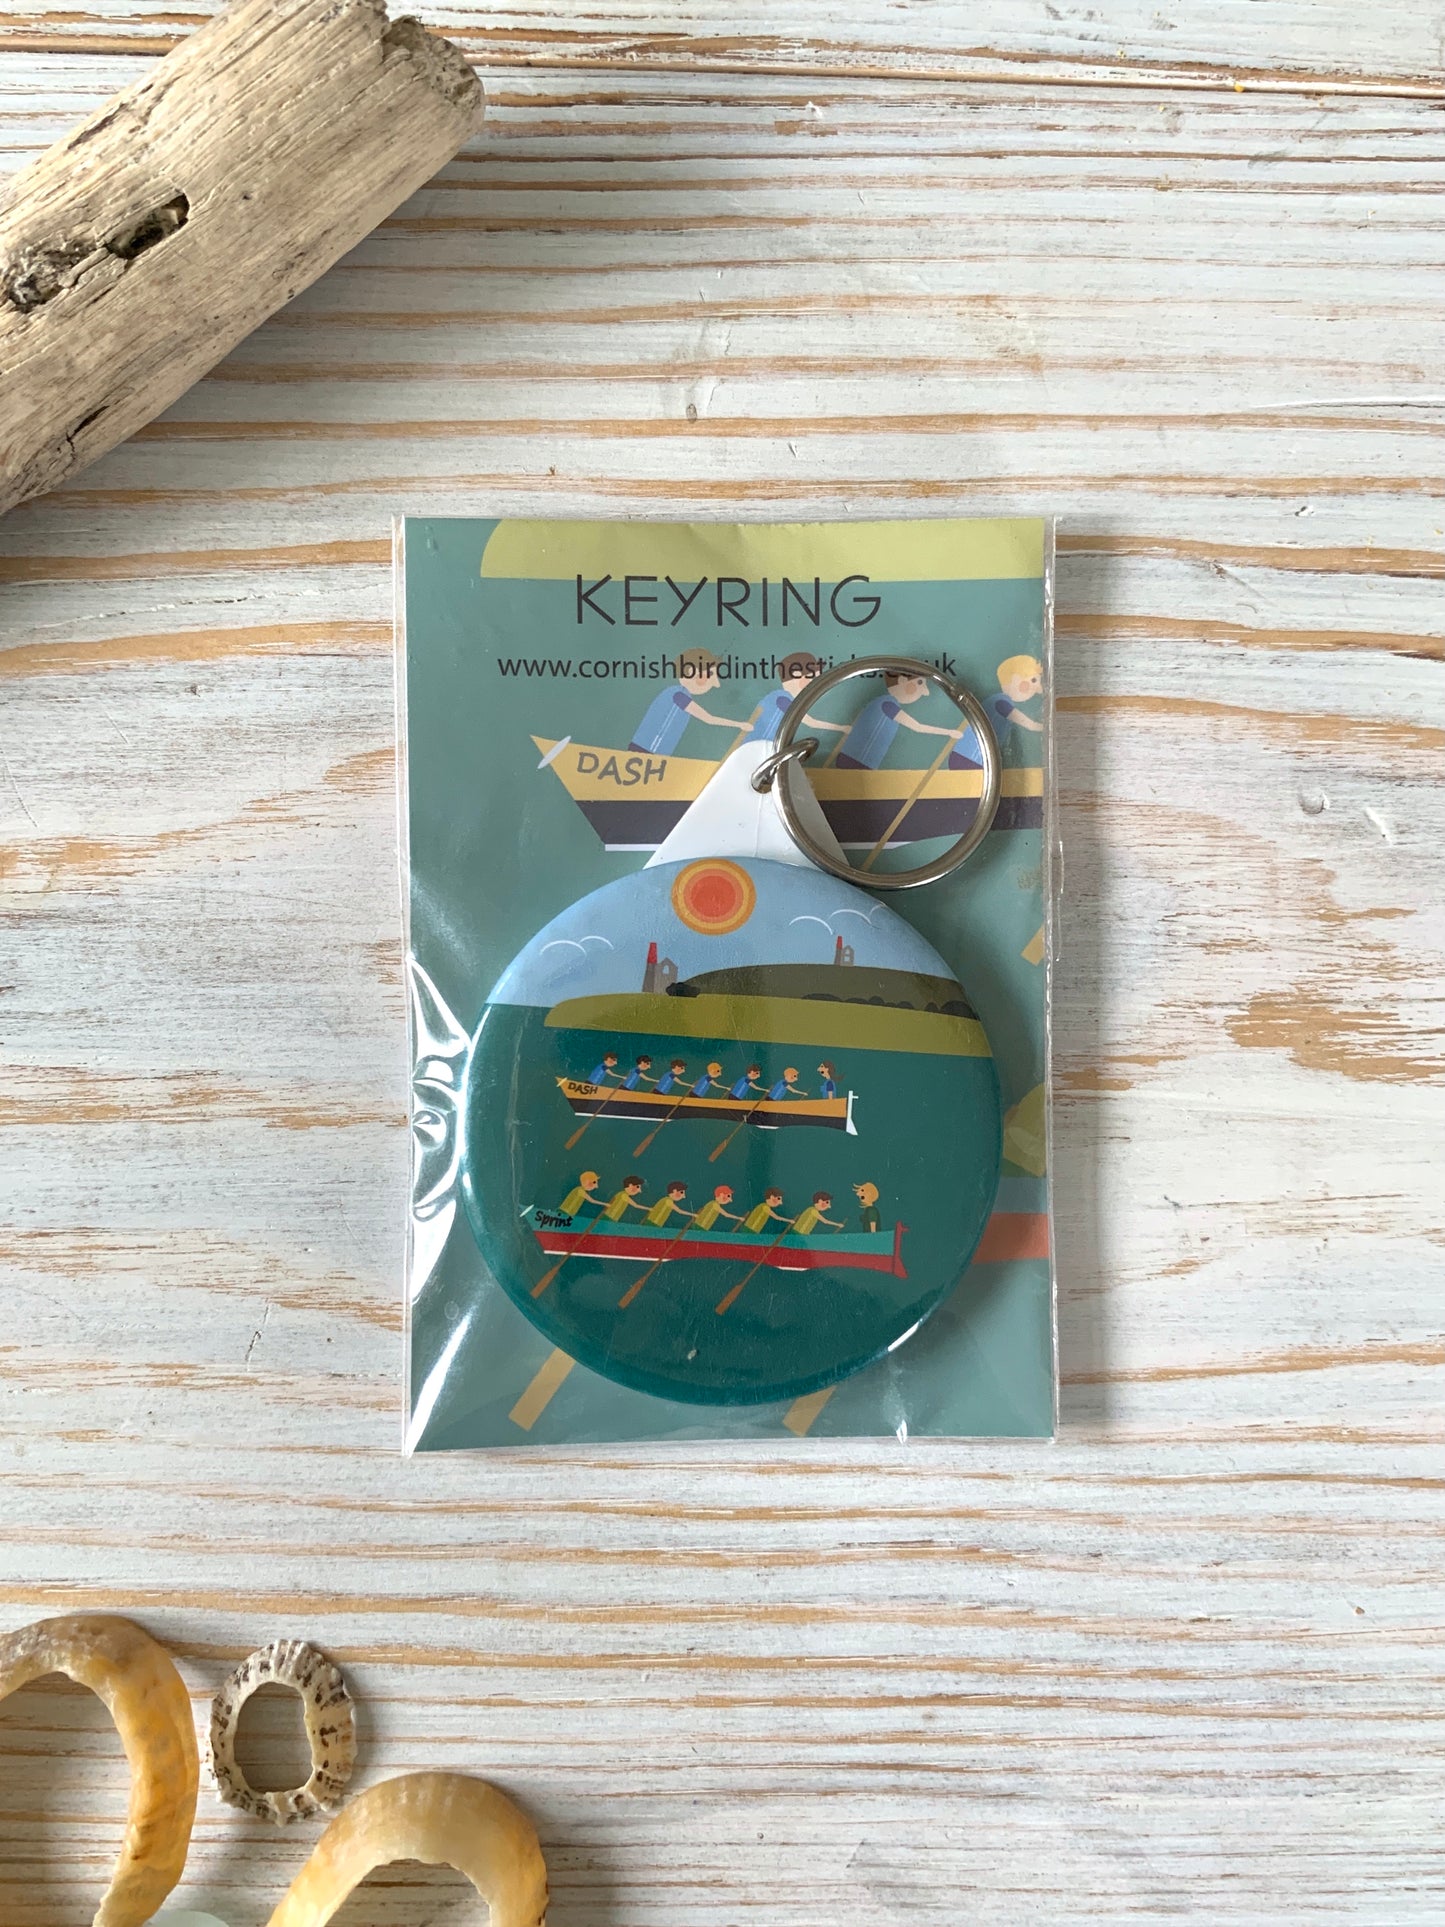 Colourful keyring depicting two gig boats racing